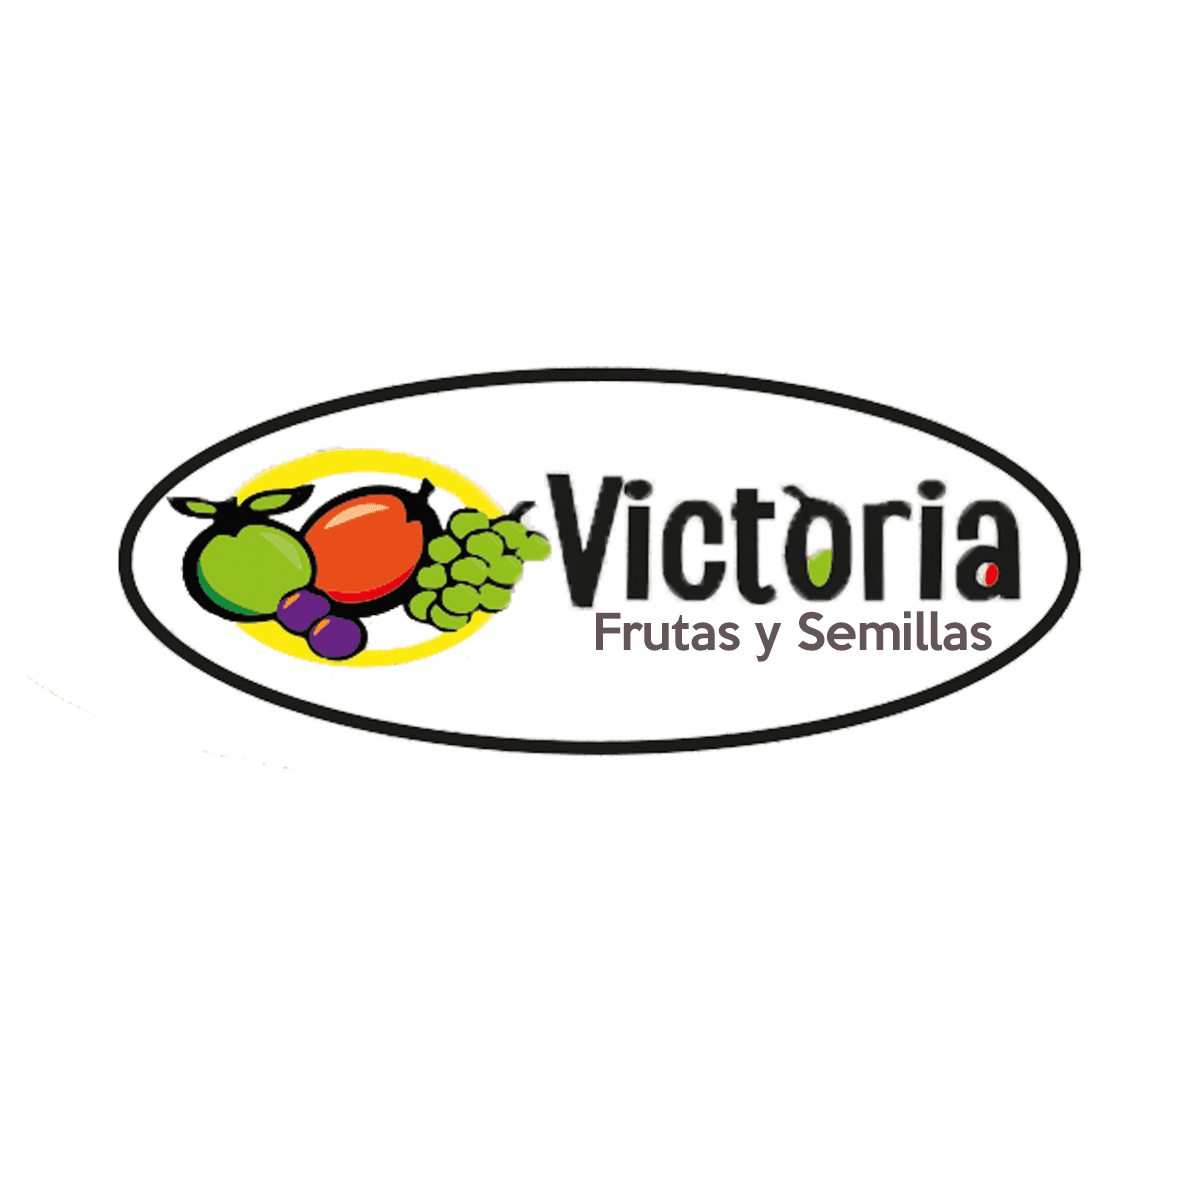 Fruits and Vegetables Victoria